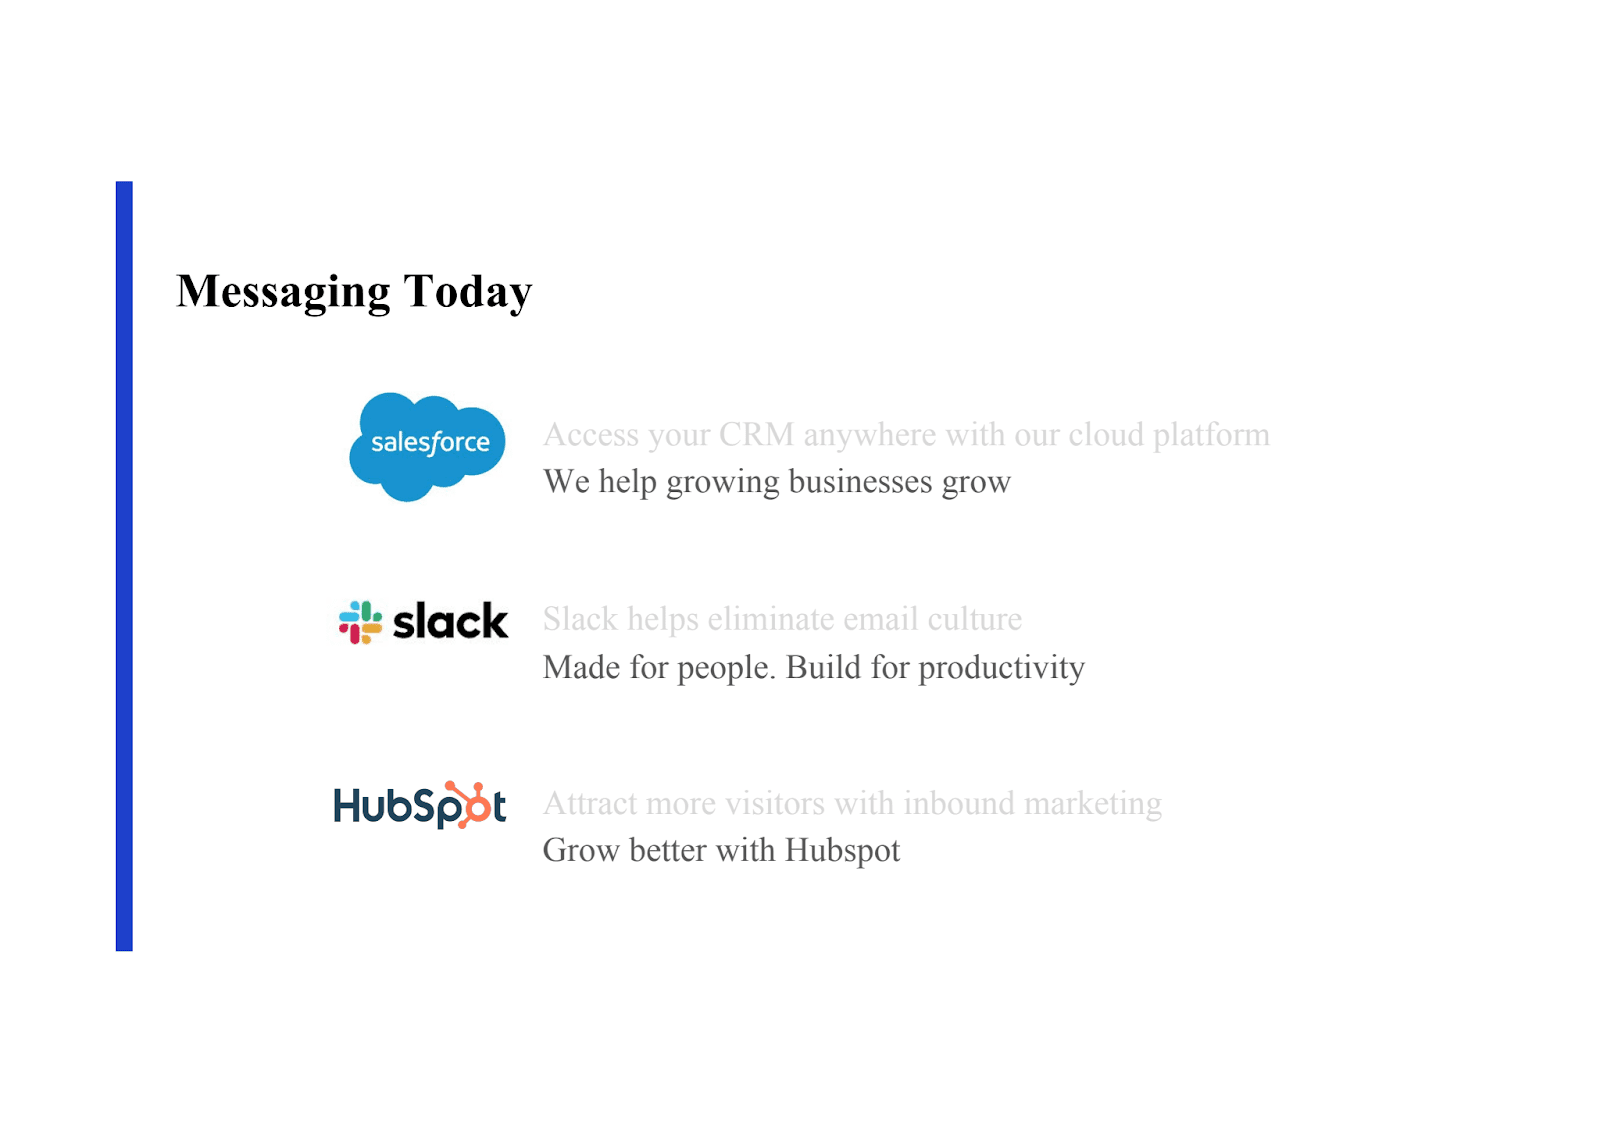 Updated messaging. Salesforce: "We help growing businesses grow". Slack: "Made for people. Built for productivity". HubSpot: "Grow better with HubSpot."